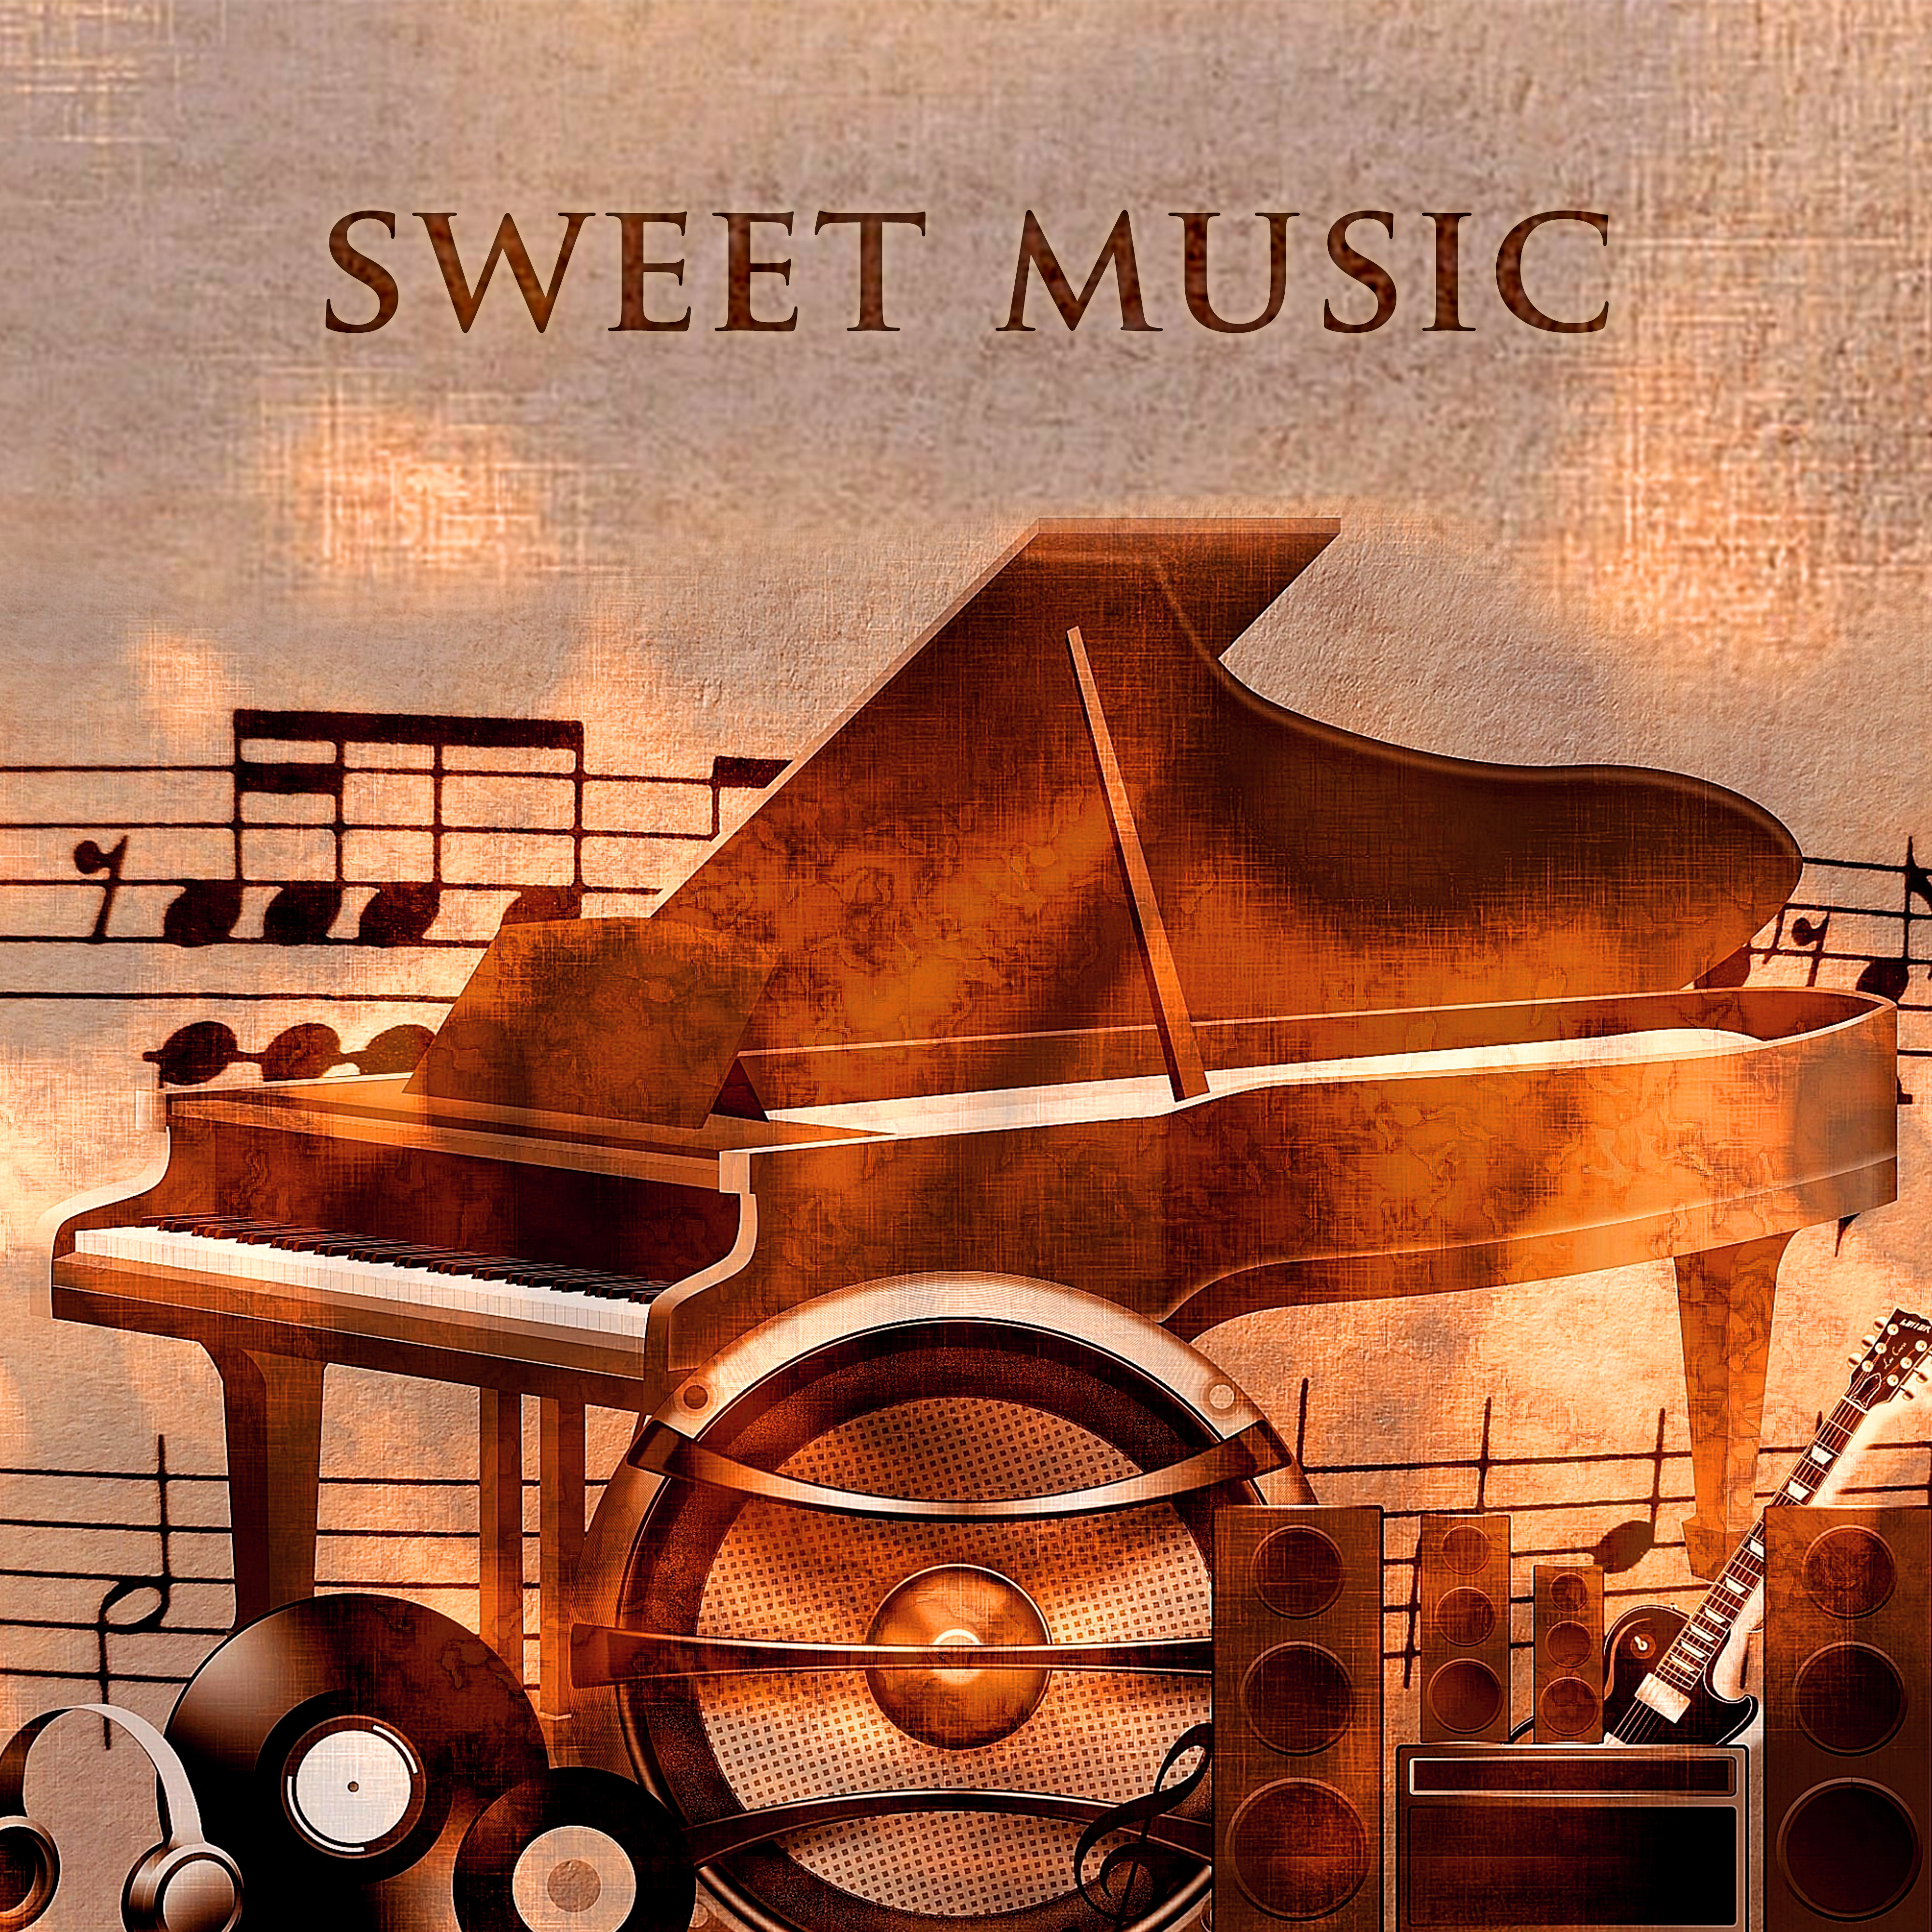 Sweet Music - Evening Chill Out Music, Golden Memories and Relaxation Music with Smooth Jazz